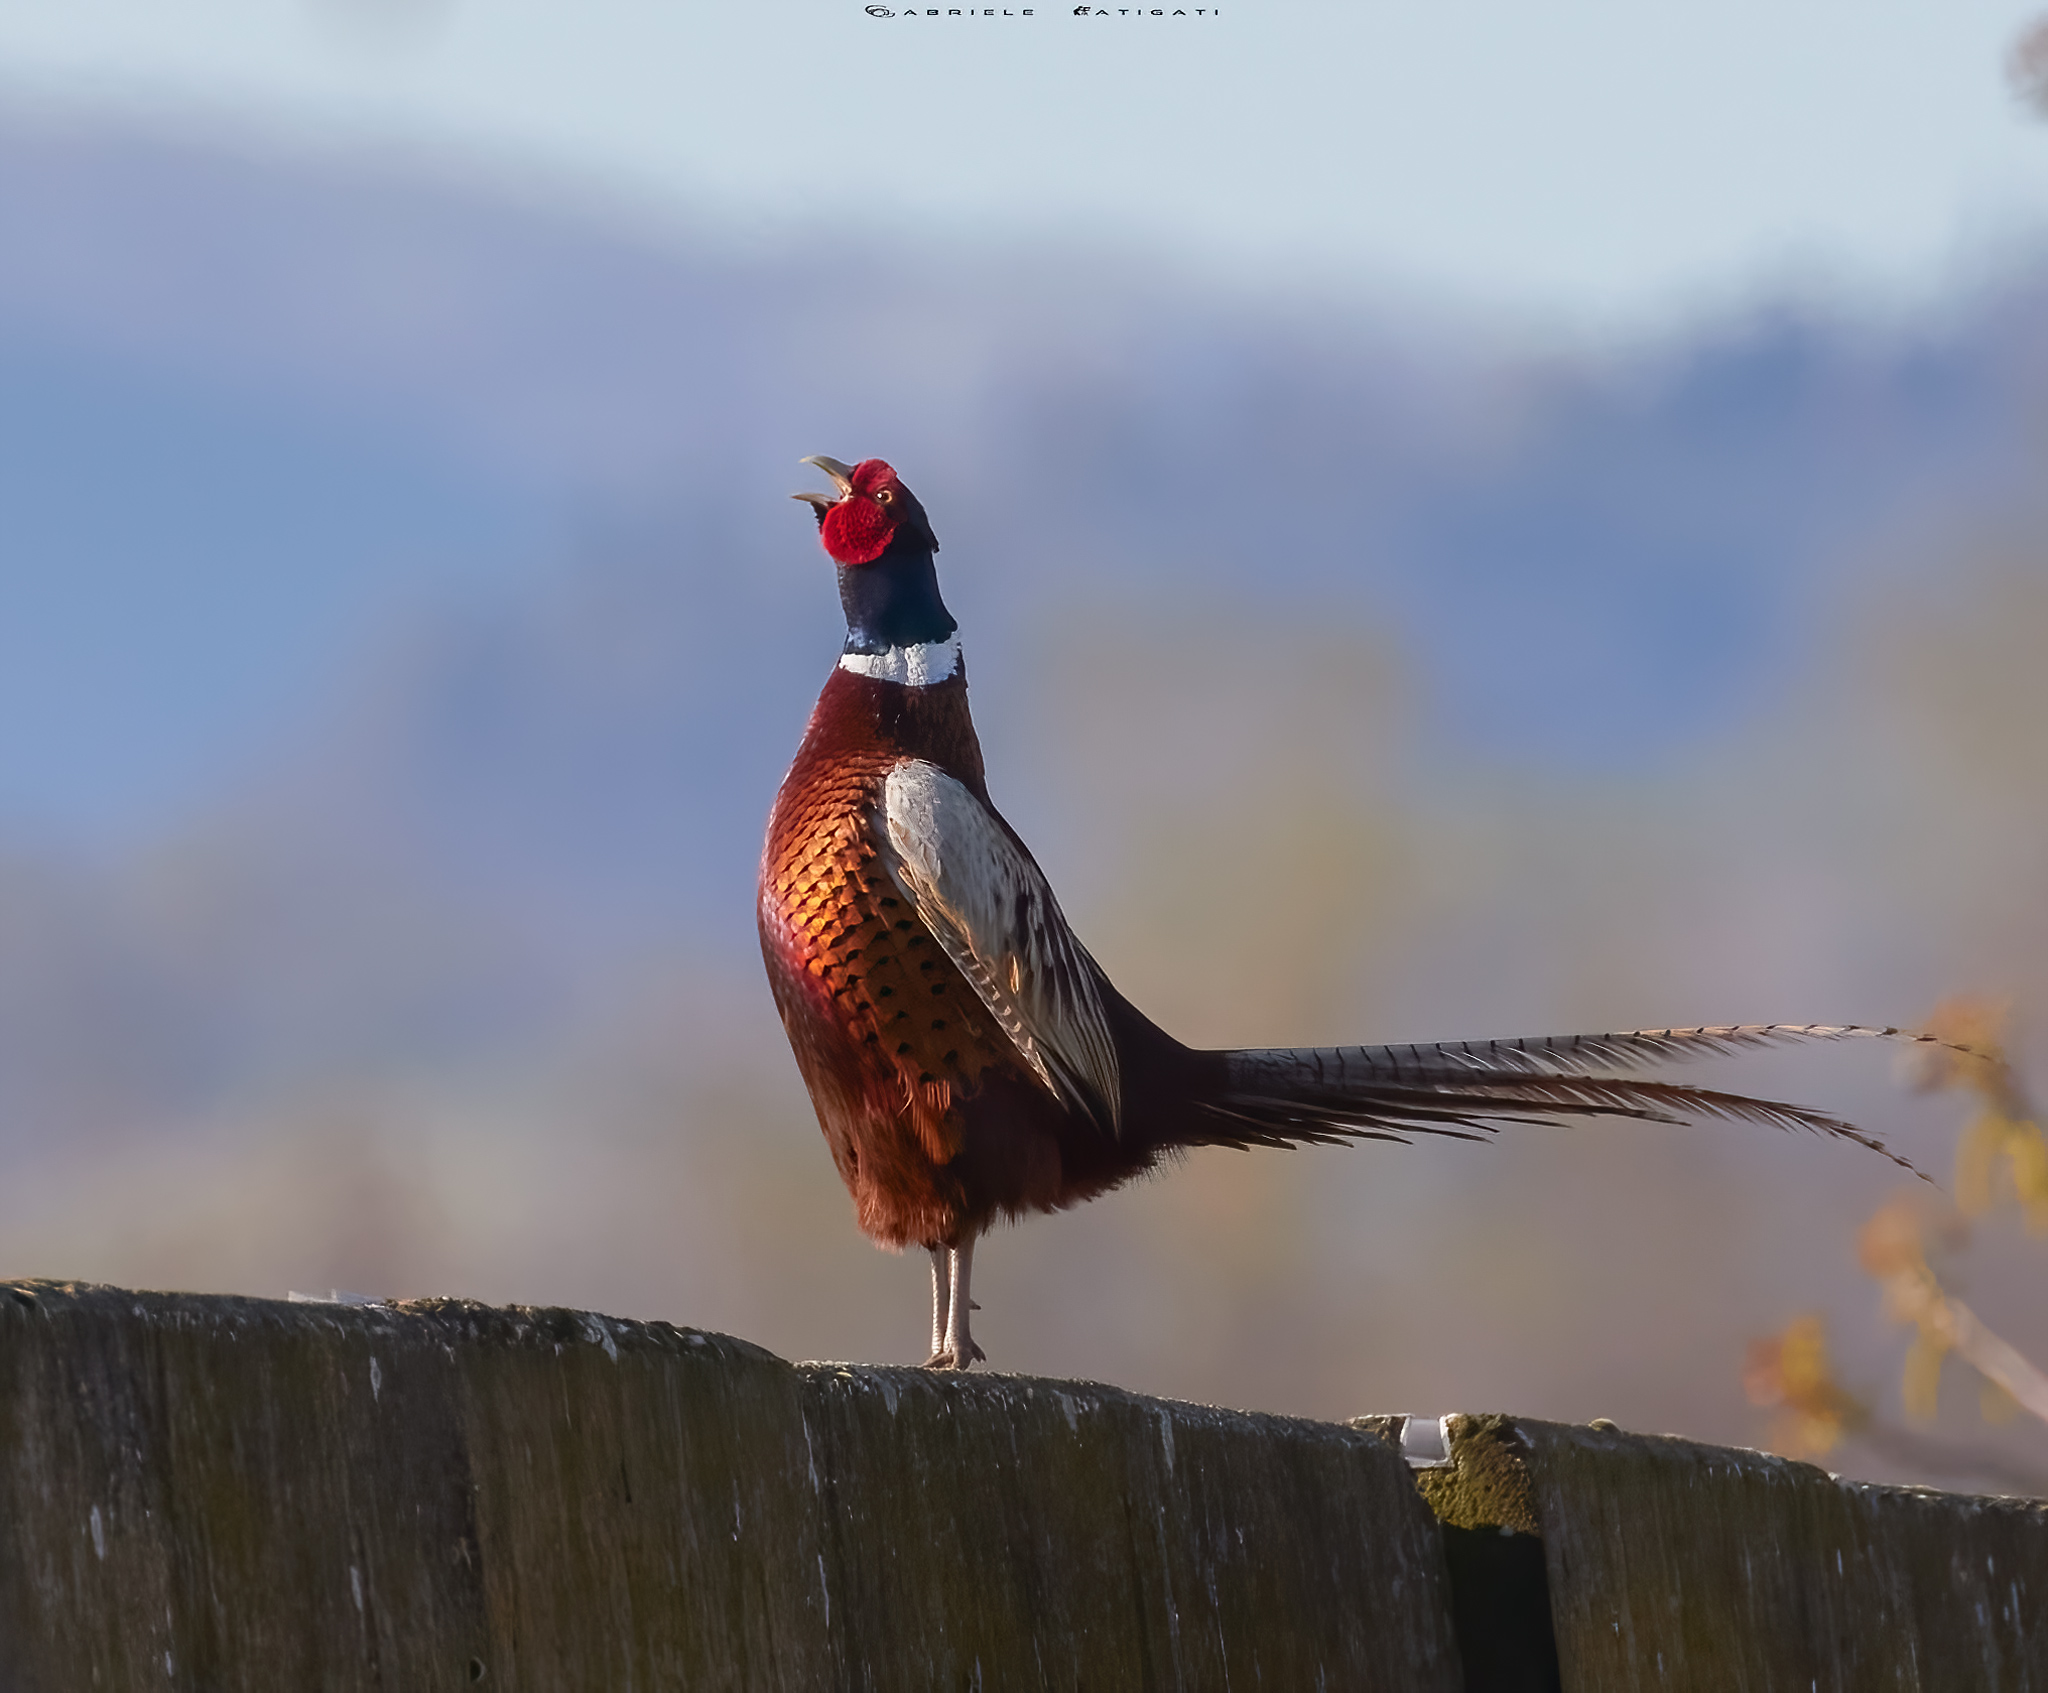 The call of the pheasant....